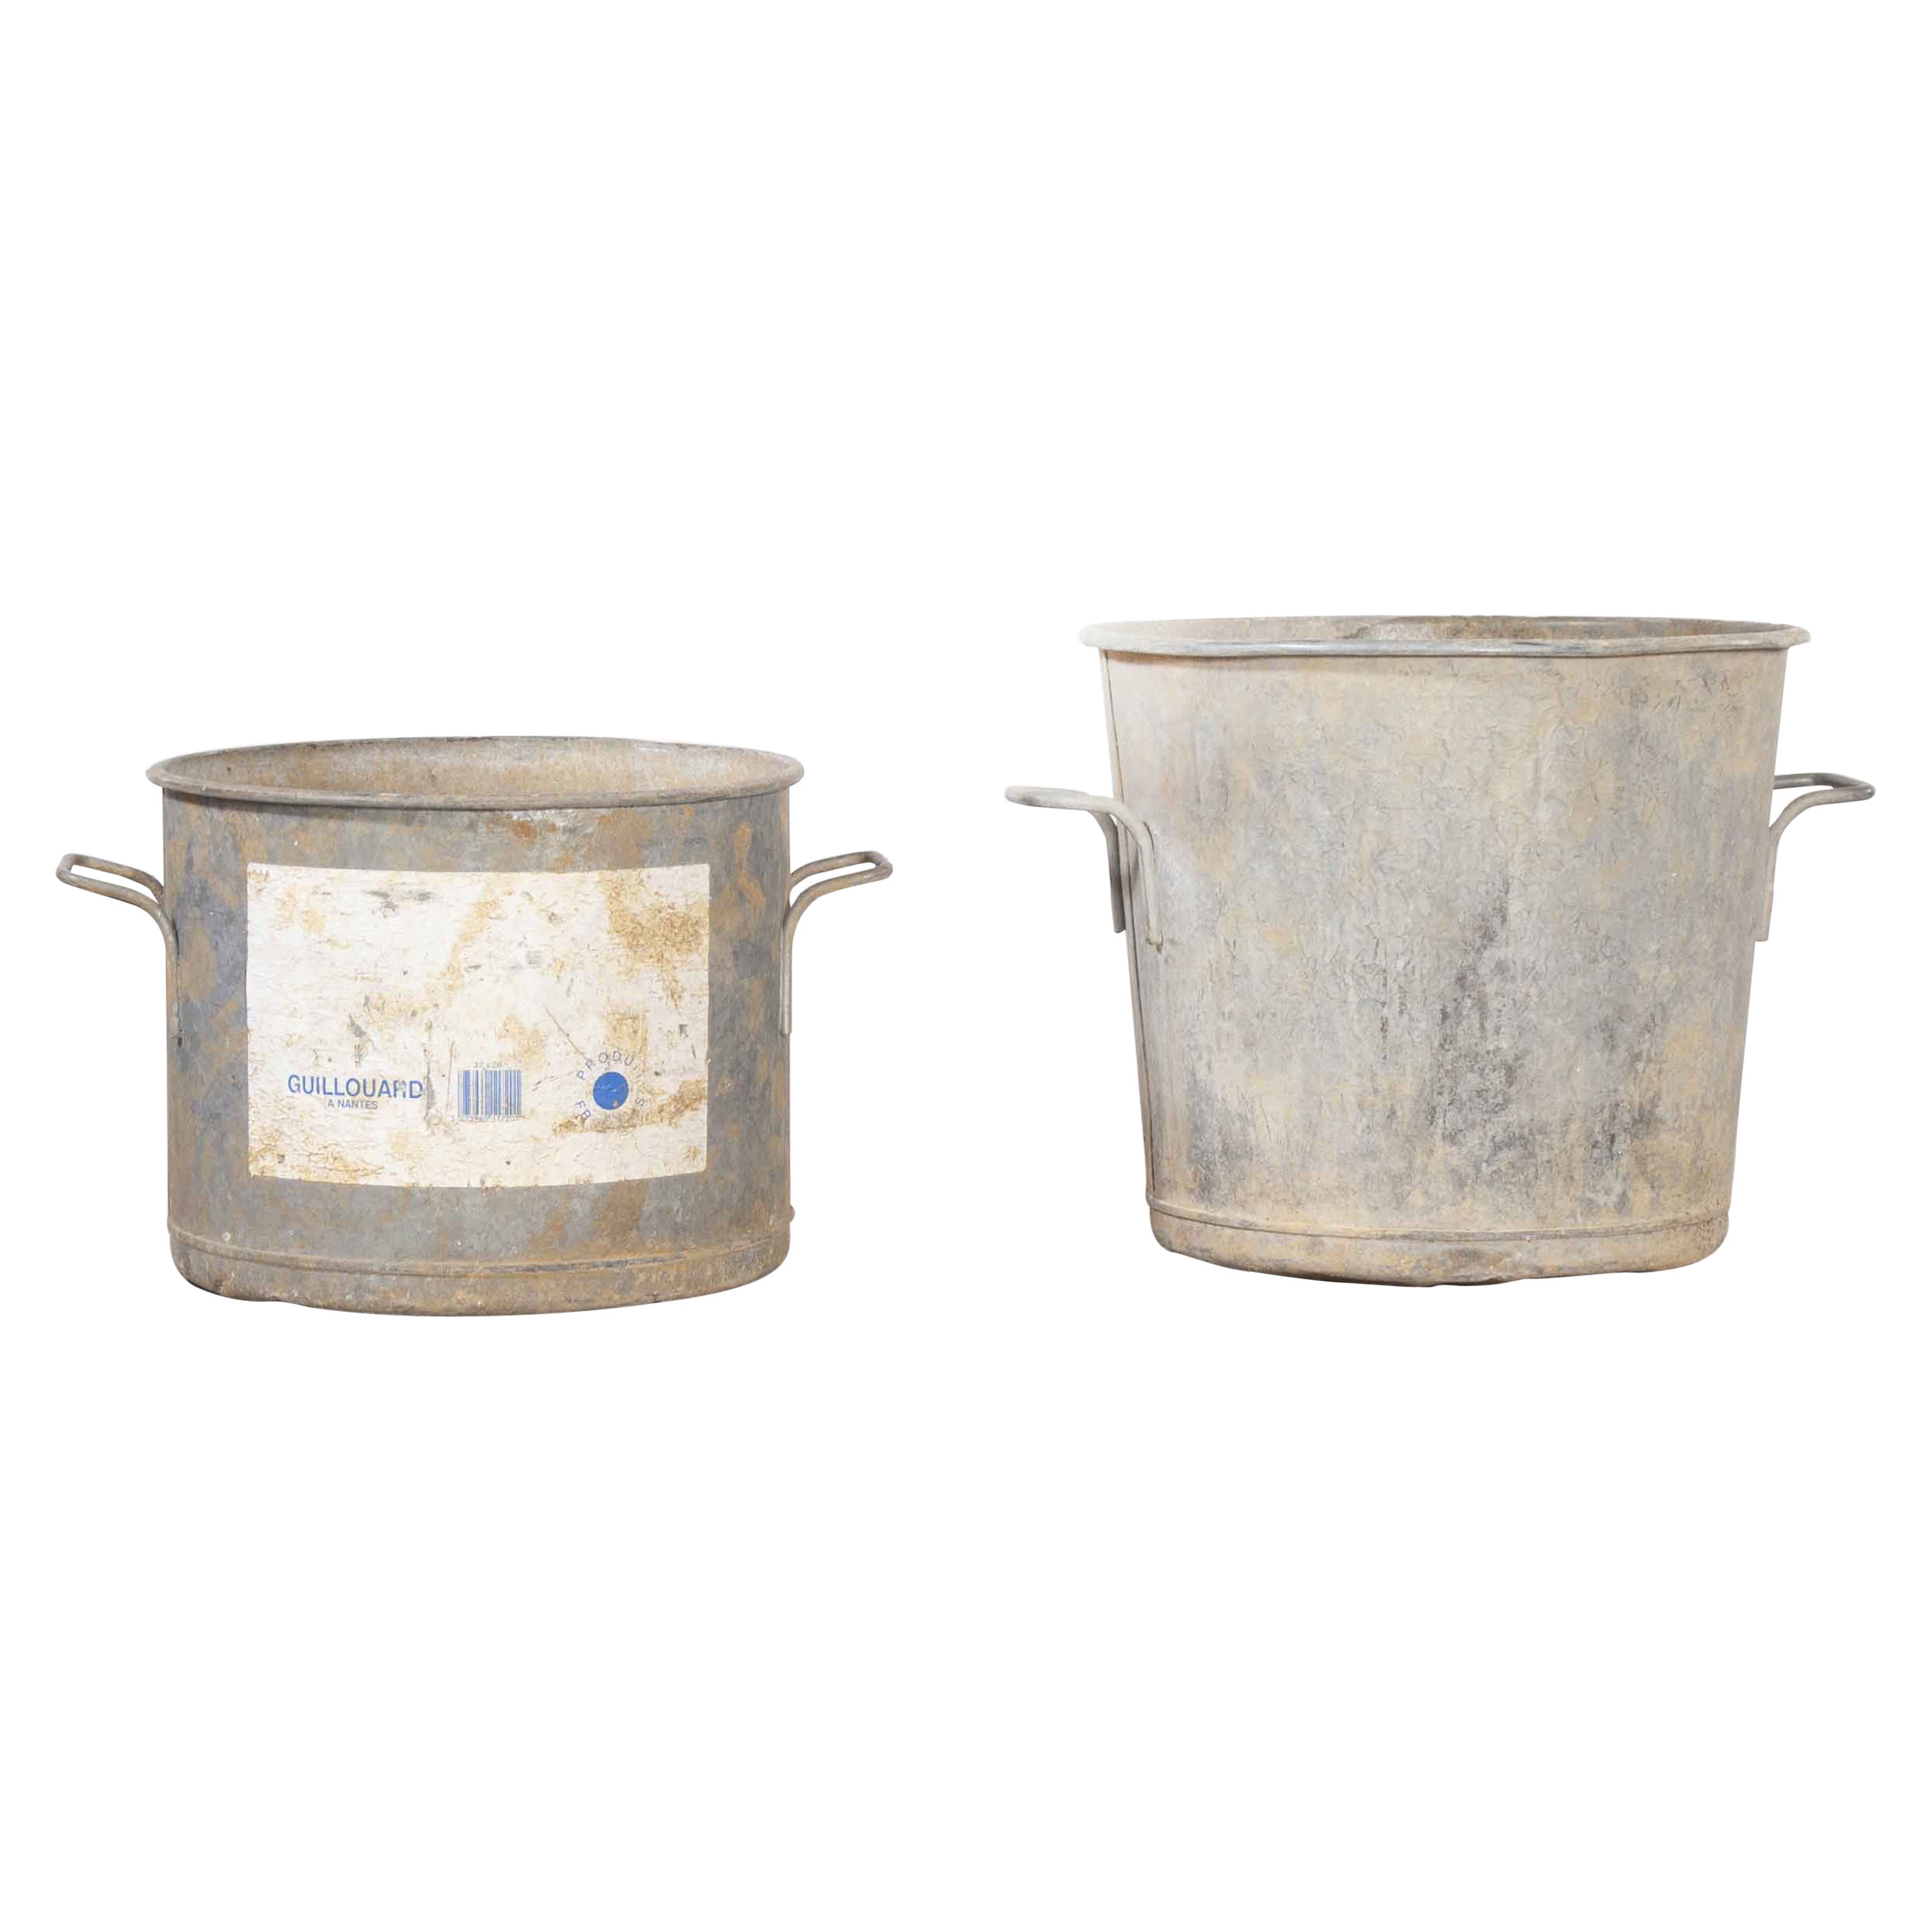 1950's Pair of French Galvanised Tubs, with Handles